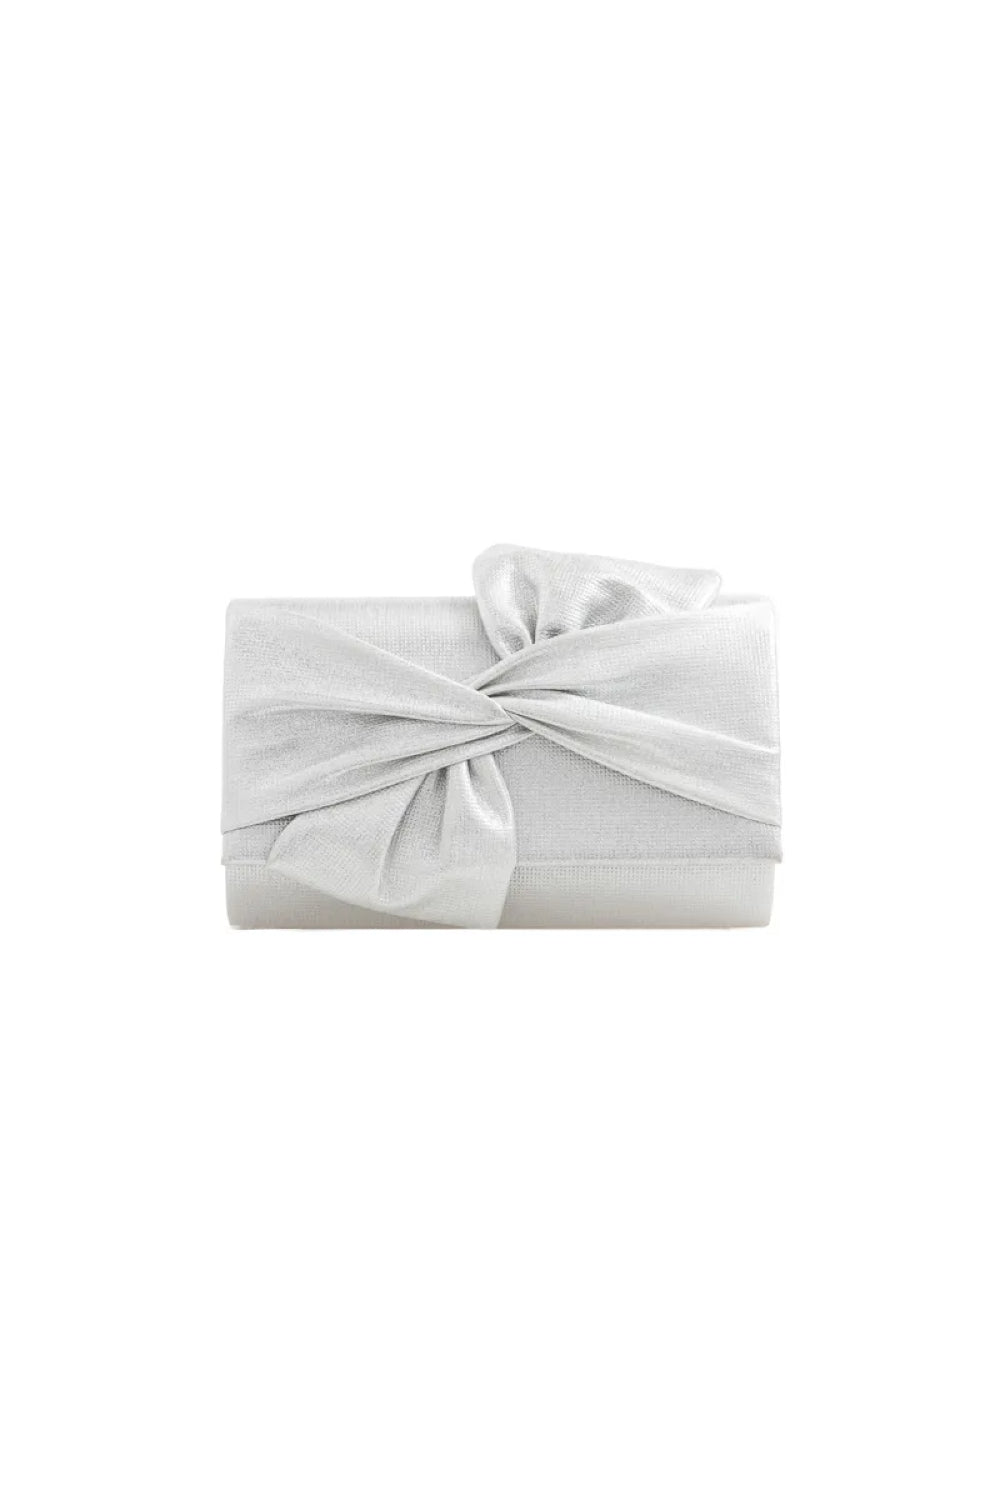 Silver Evening Clutch Bag with Bow Detail